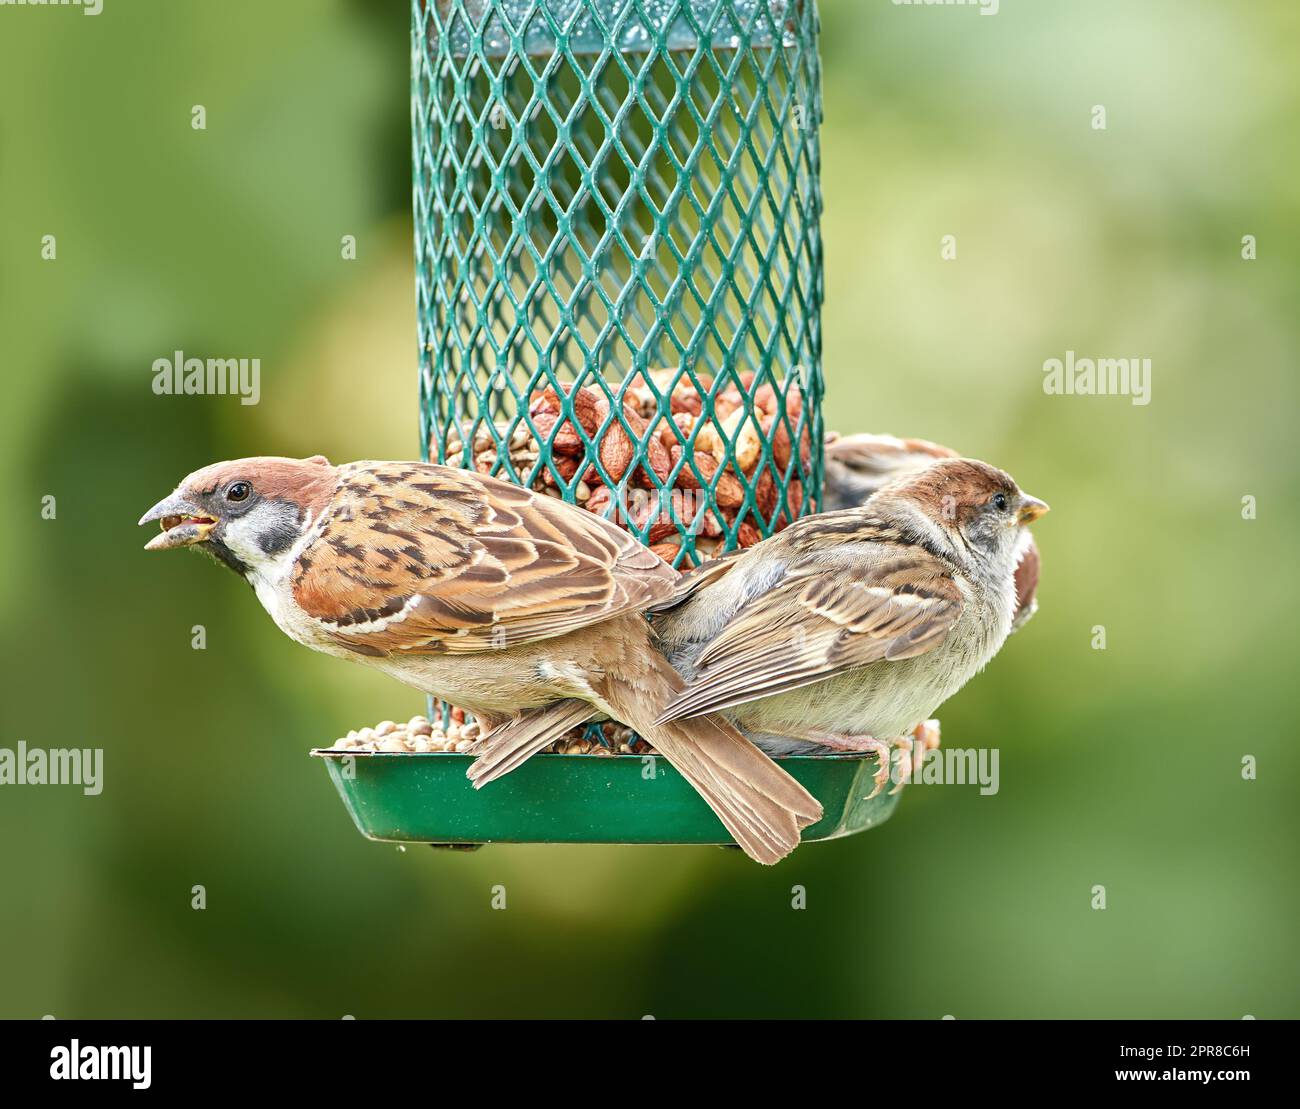 Sparrows are a family of small passerine birds, Passeridae. They are also known as true sparrows, or Old World sparrows, names also used for a particular genus of the family, Passer. Stock Photo